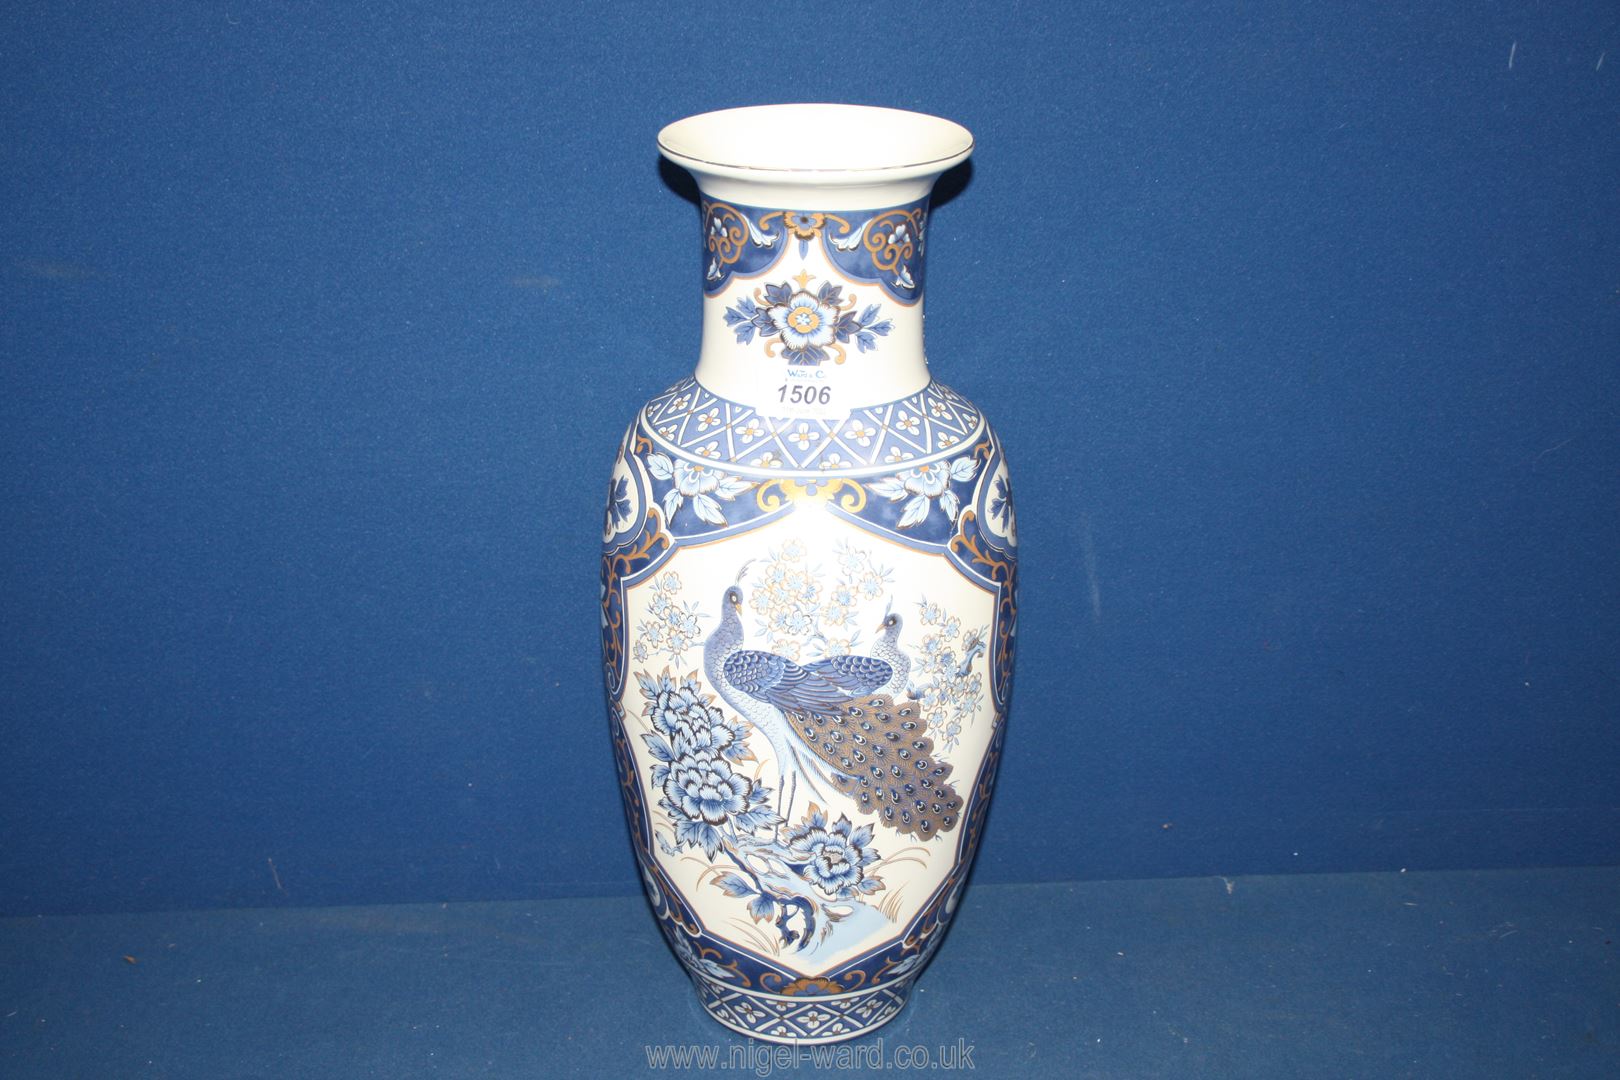 An oriental style Vase with panels of blue and gold Peacocks between floral detail on a white